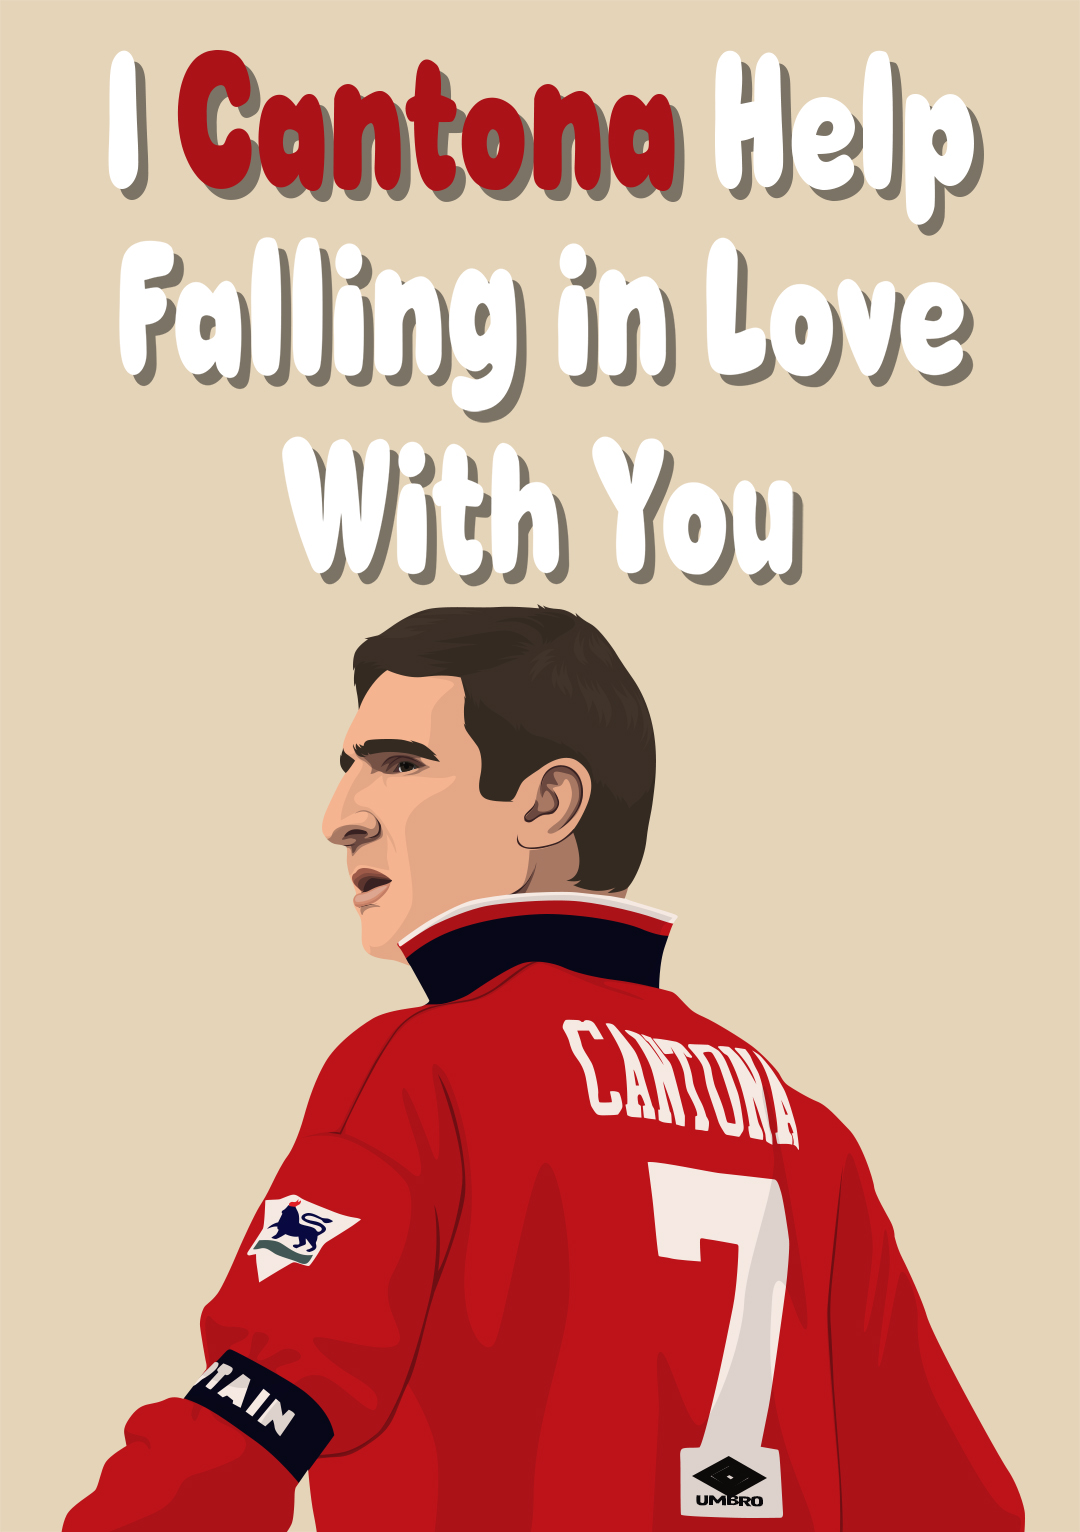 I Cantona Help Falling In Love With You